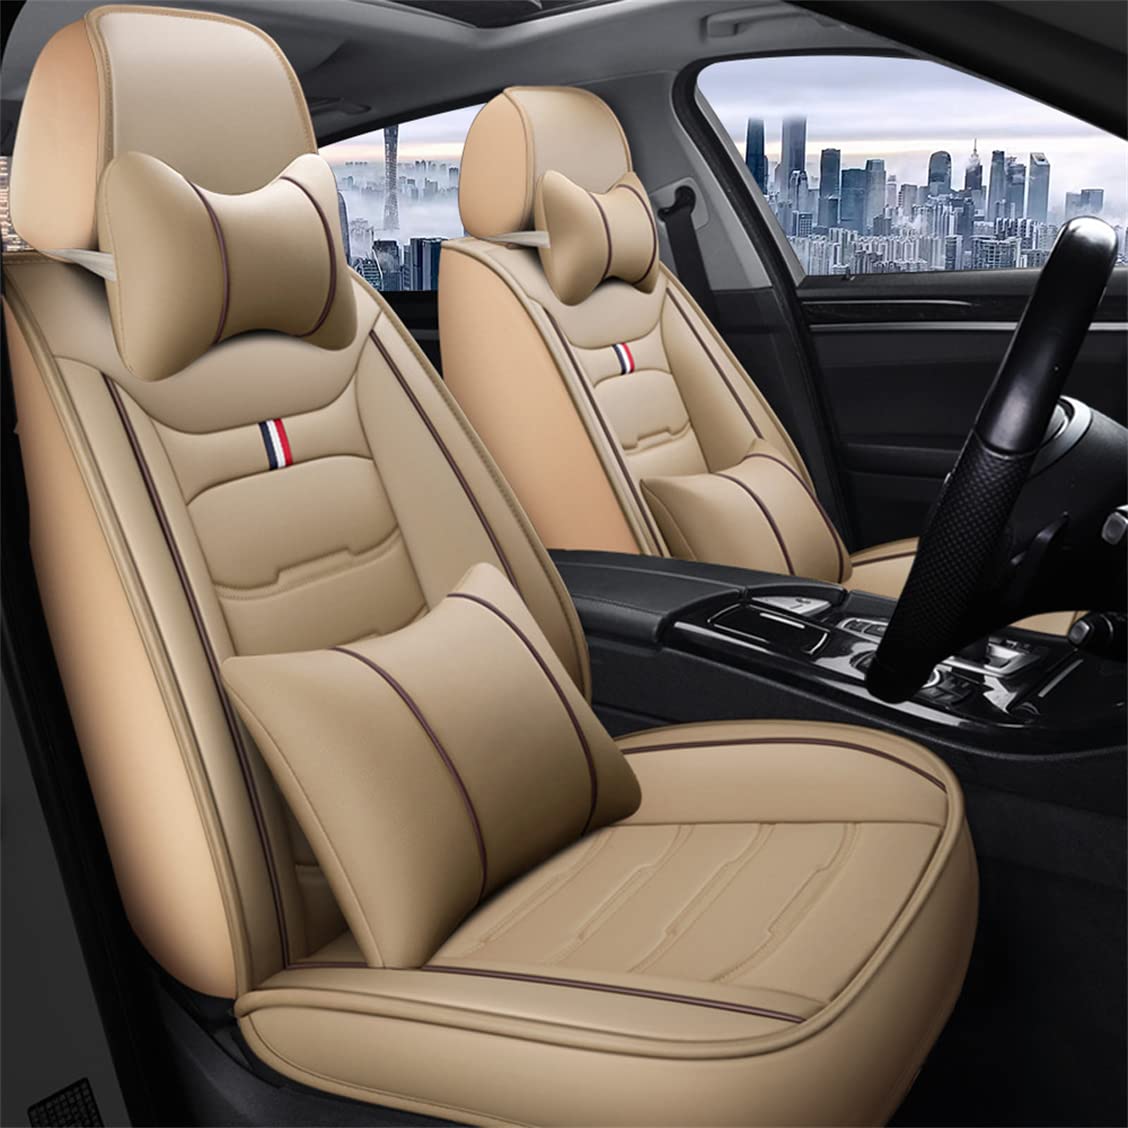 Amazon.com: Yajomi Car Seat Covers Fit for Hyundai XG350 2003-2005 2 Front  Seats Luxury Wear-Resistant Non-Slip Waterproof Faux Leather Cushion Cover  Protectors Car Interior Accessories (Beige) : Automotive